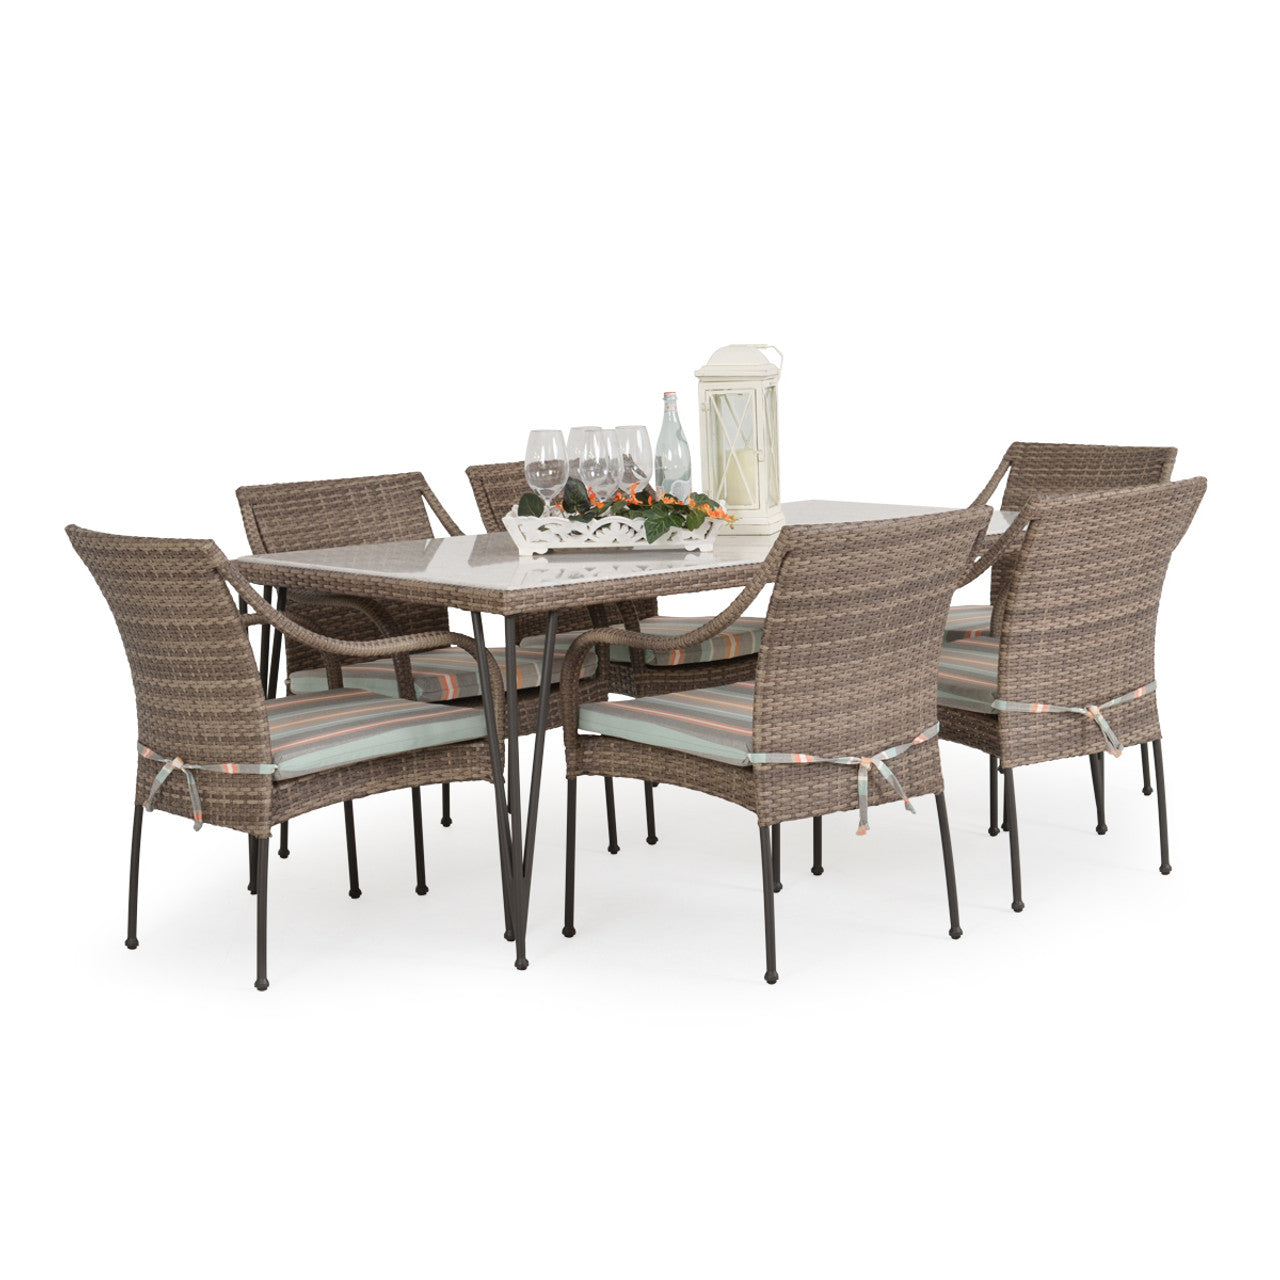 Leaders Furniture Garden Terrace Outdoor Wicker 39" x 68" Rectangle Dining Table with Stone Top